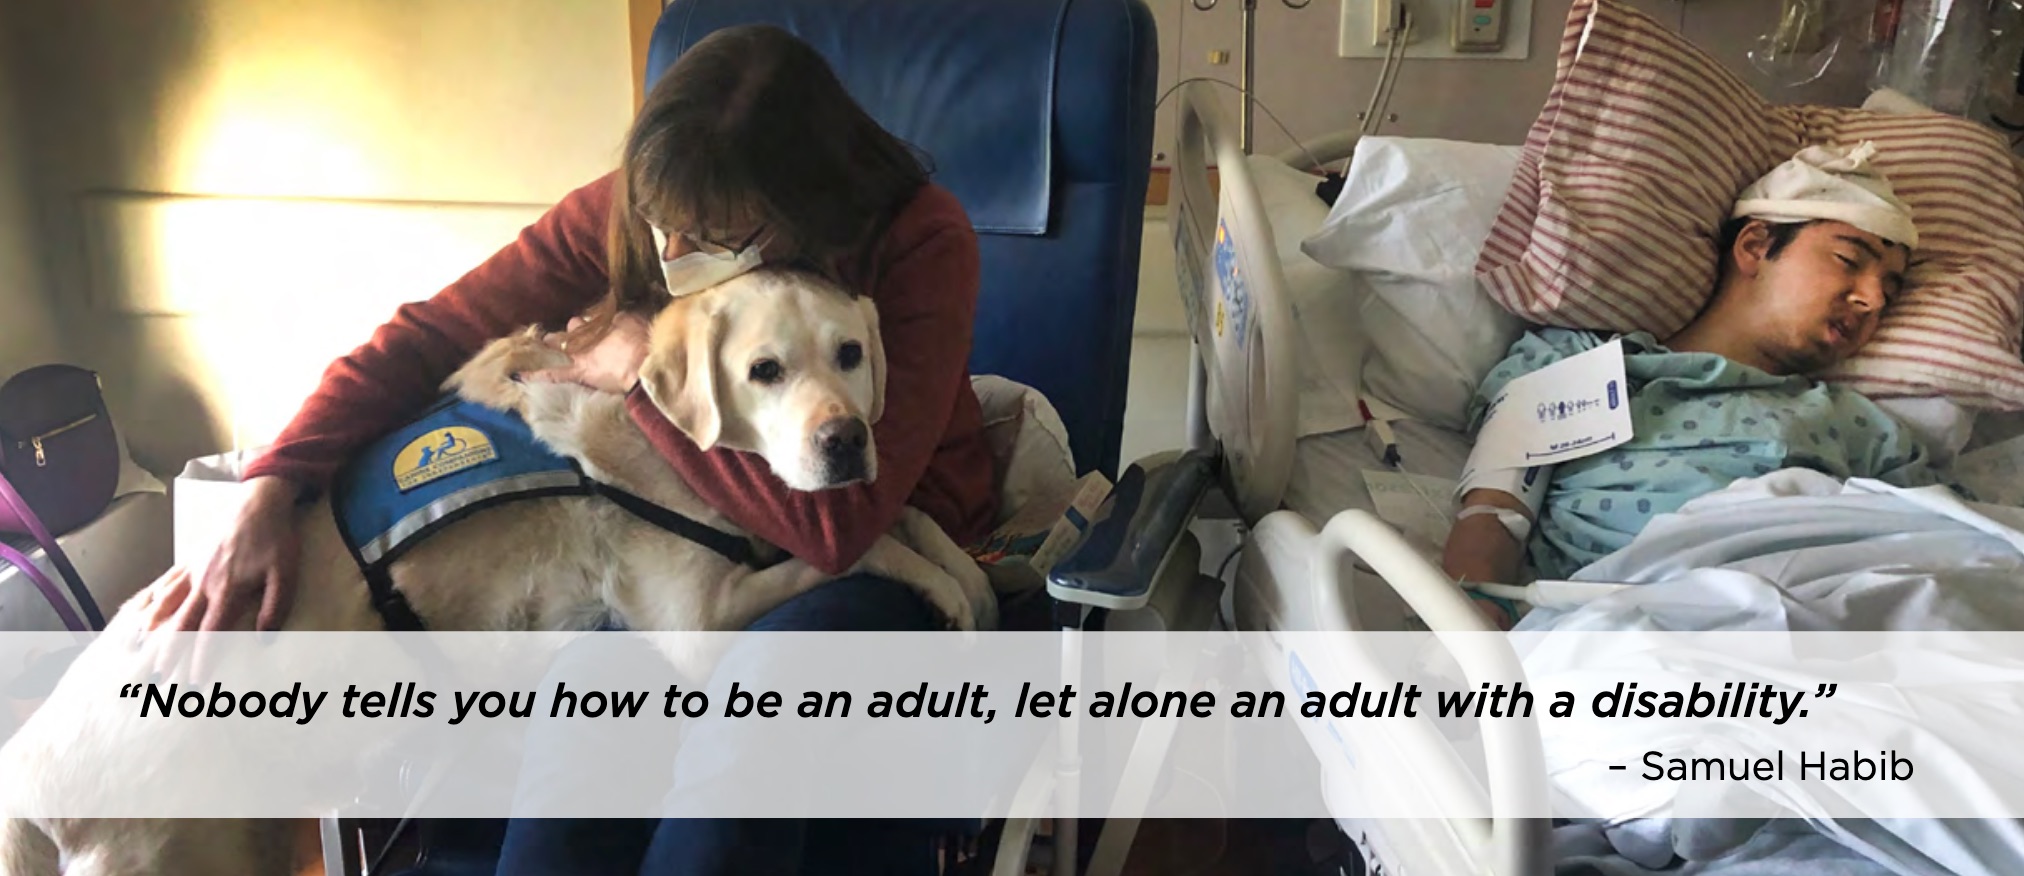 A middle-aged woman hugs a golden retriever in a service vest, in a dimly lit hospital room. In a bed next to her, lies a teenage boy in hospital gown and cap, unconscious. Text: "Nobody tells you how to be an adult, let alone an adult with a disability." Attributed to Samuel Habib.